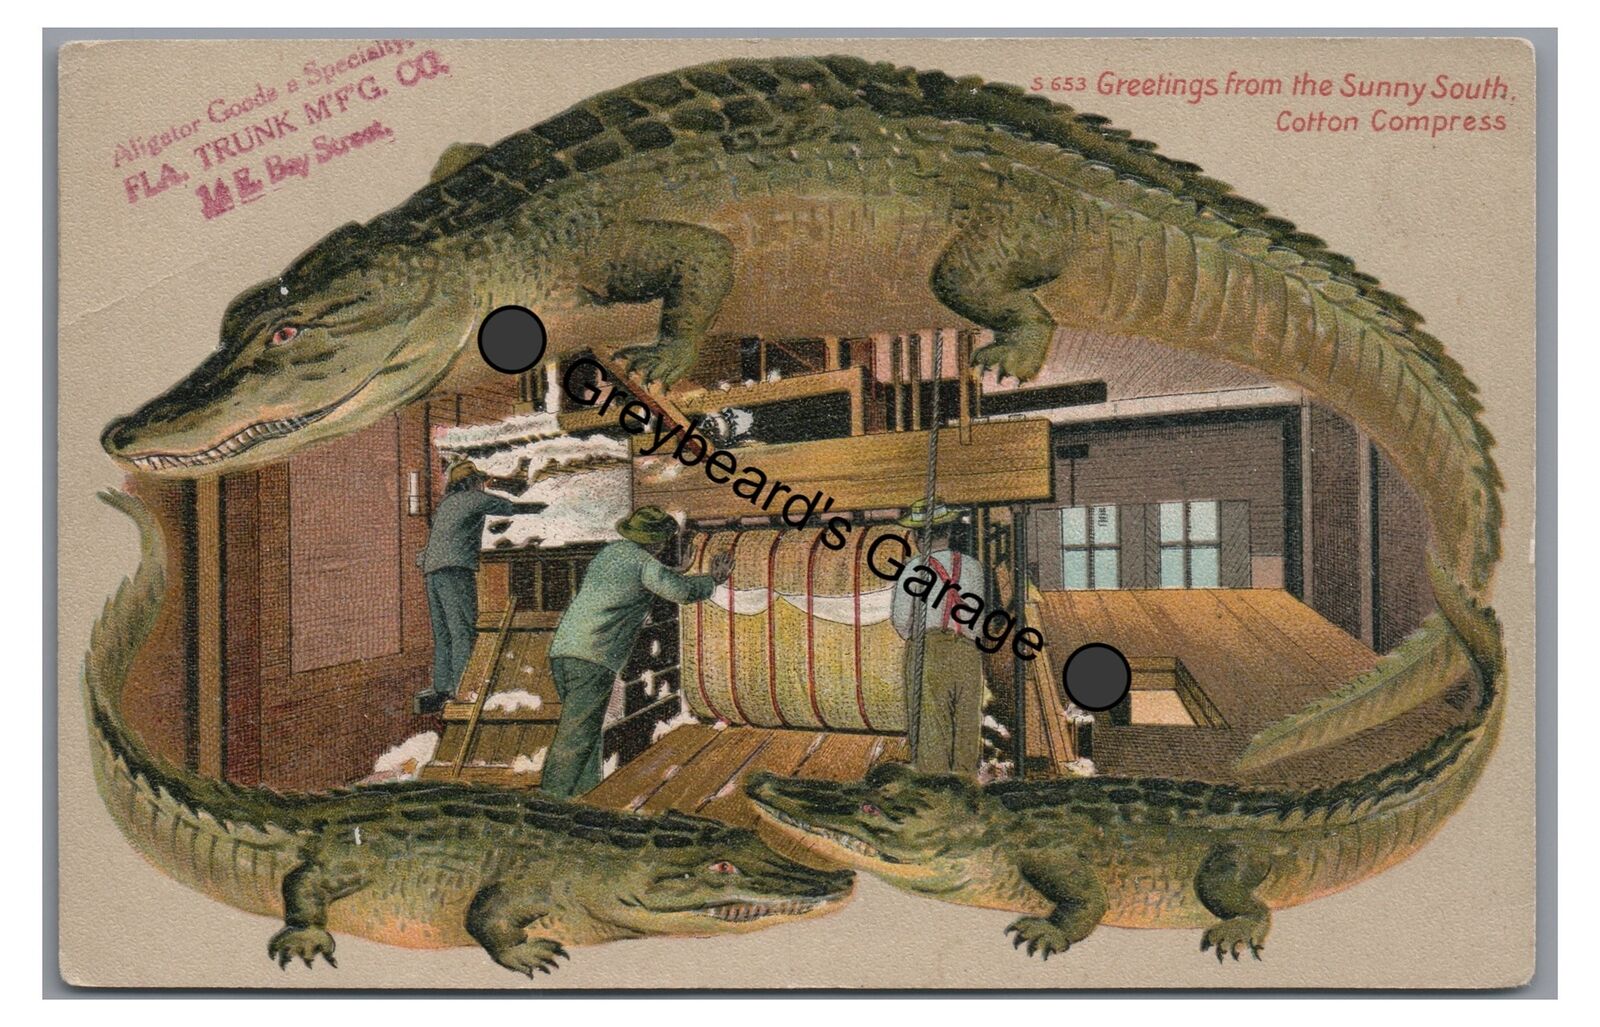 Greetings from the Sunny South Cotton Gin Langsdorf ALLIGATOR BORDER Postcard